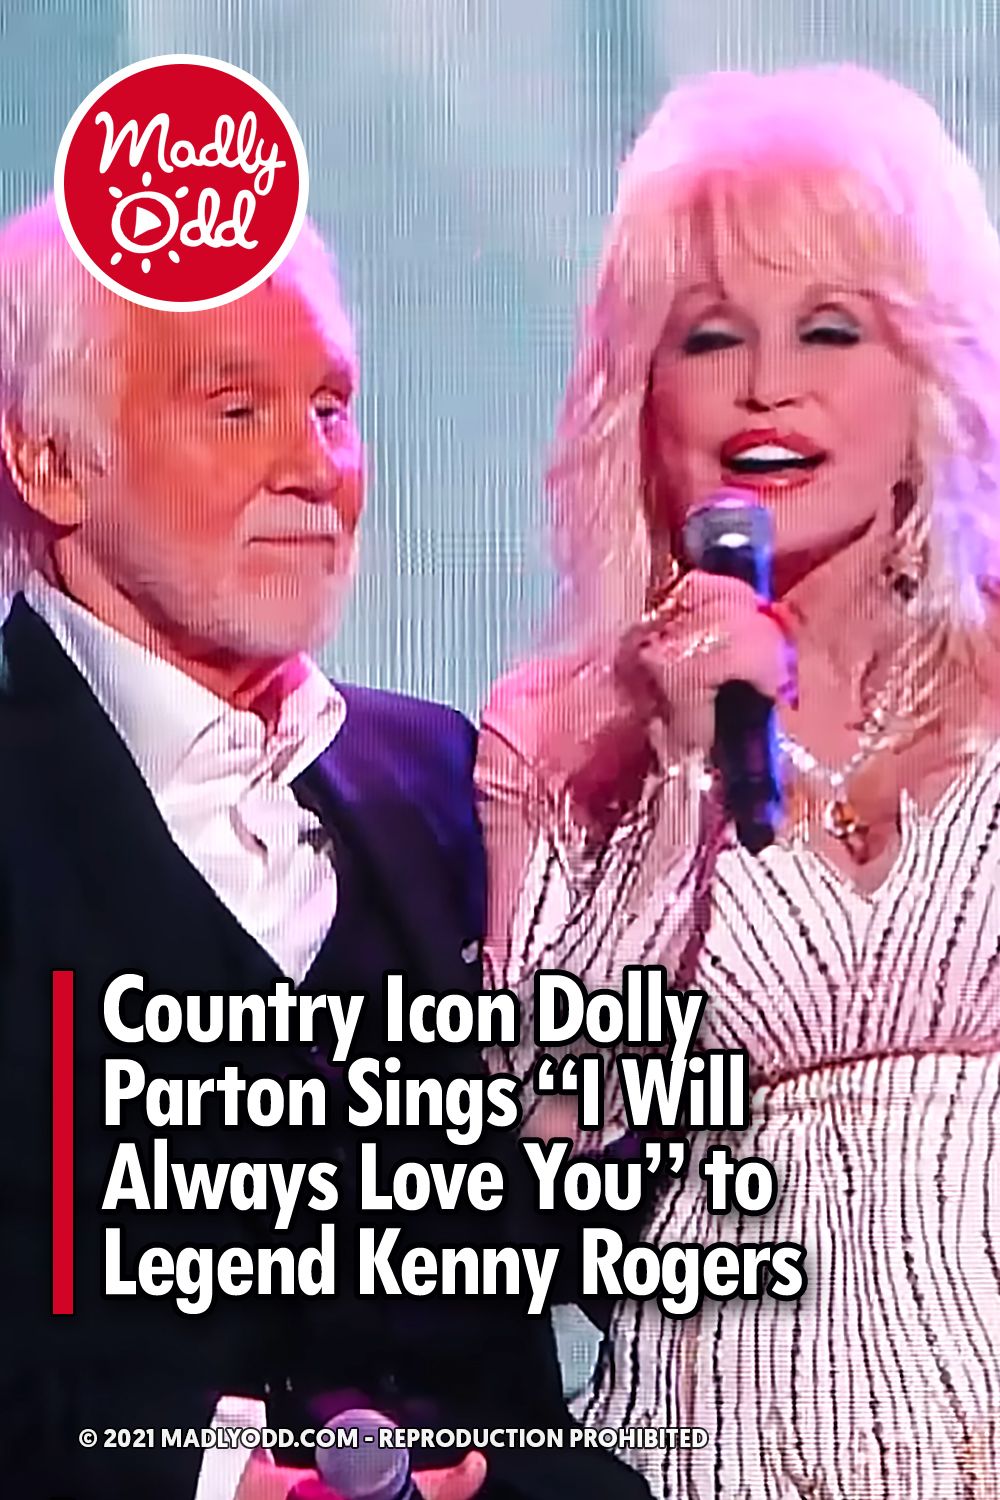 Country Icon Dolly Parton Sings “I Will Always Love You” to Legend Kenny Rogers